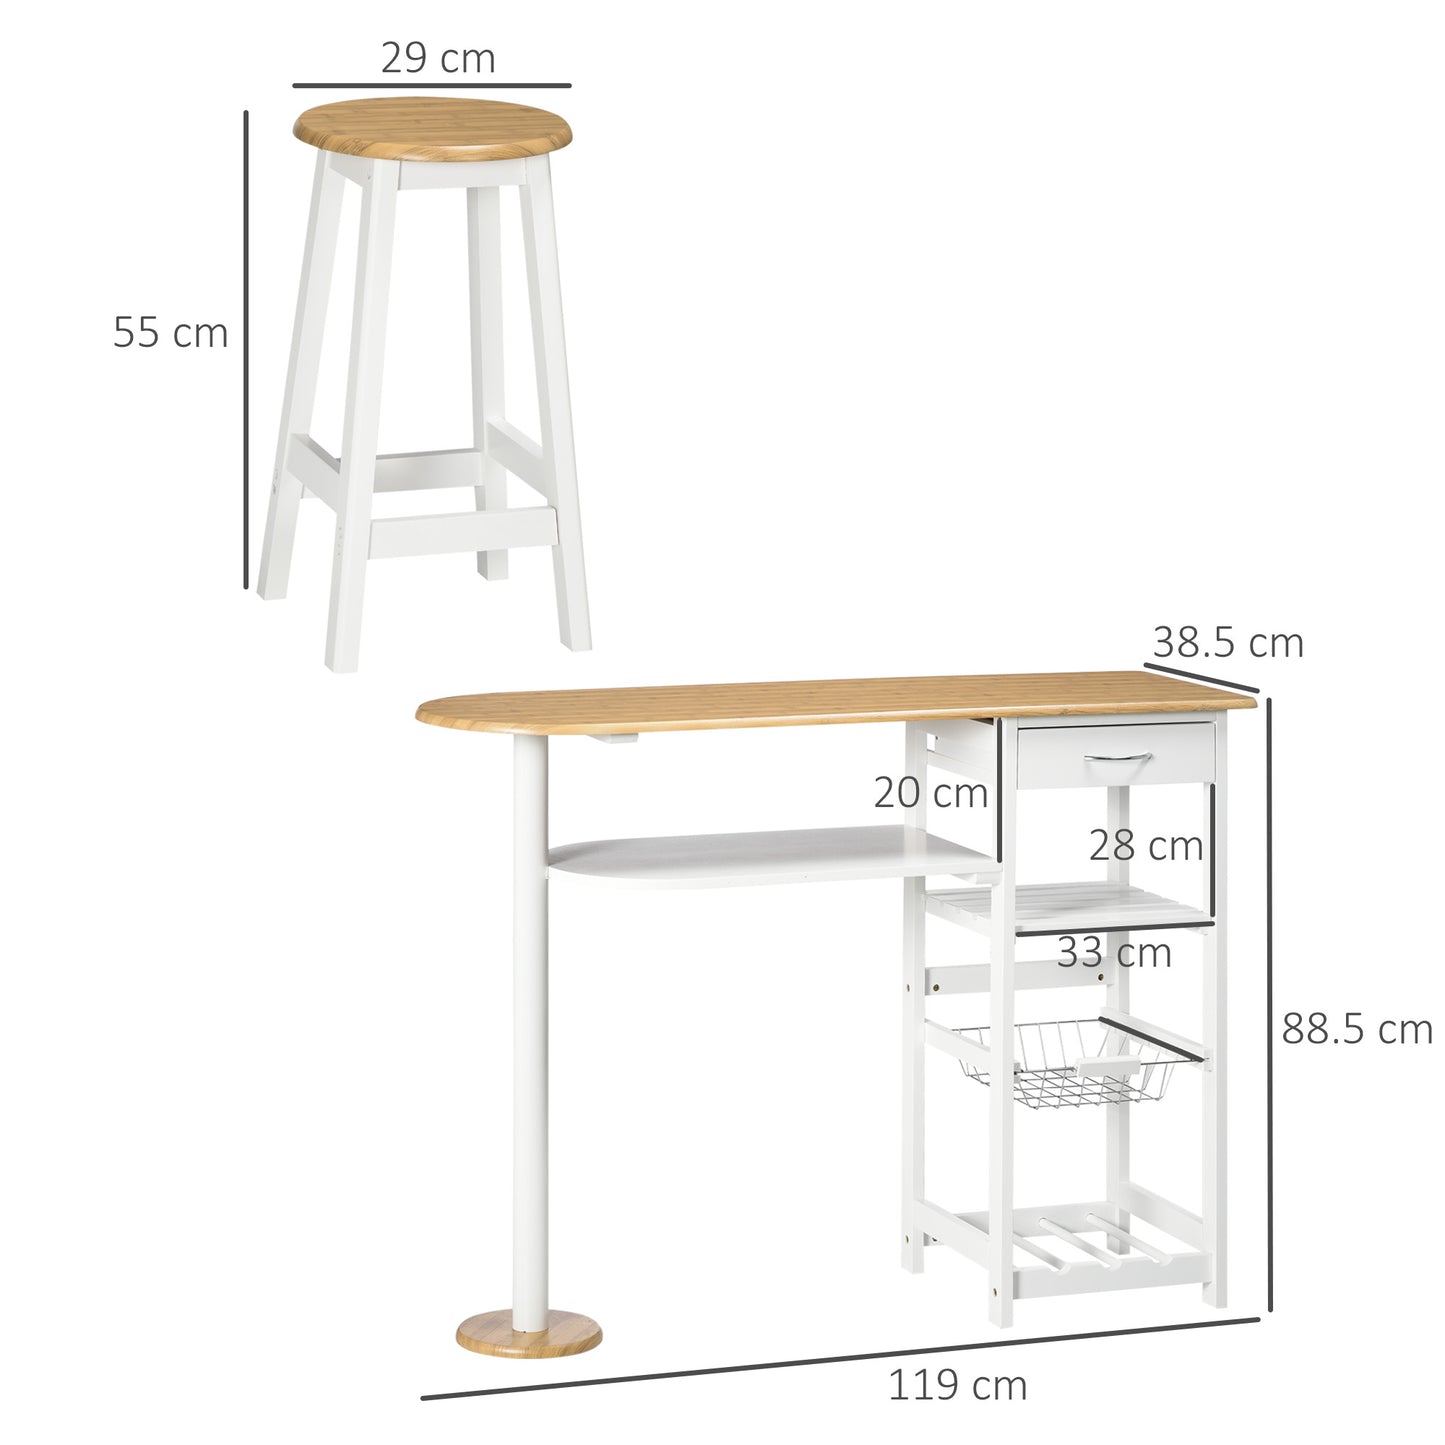 HOMCOM 3 Piece Bar Table Set, Breakfast Bar table and Stools with Storage Shelf, Drawer, Wire Basket and Wine Rack for Kitchen, Home Bar, Natural and White